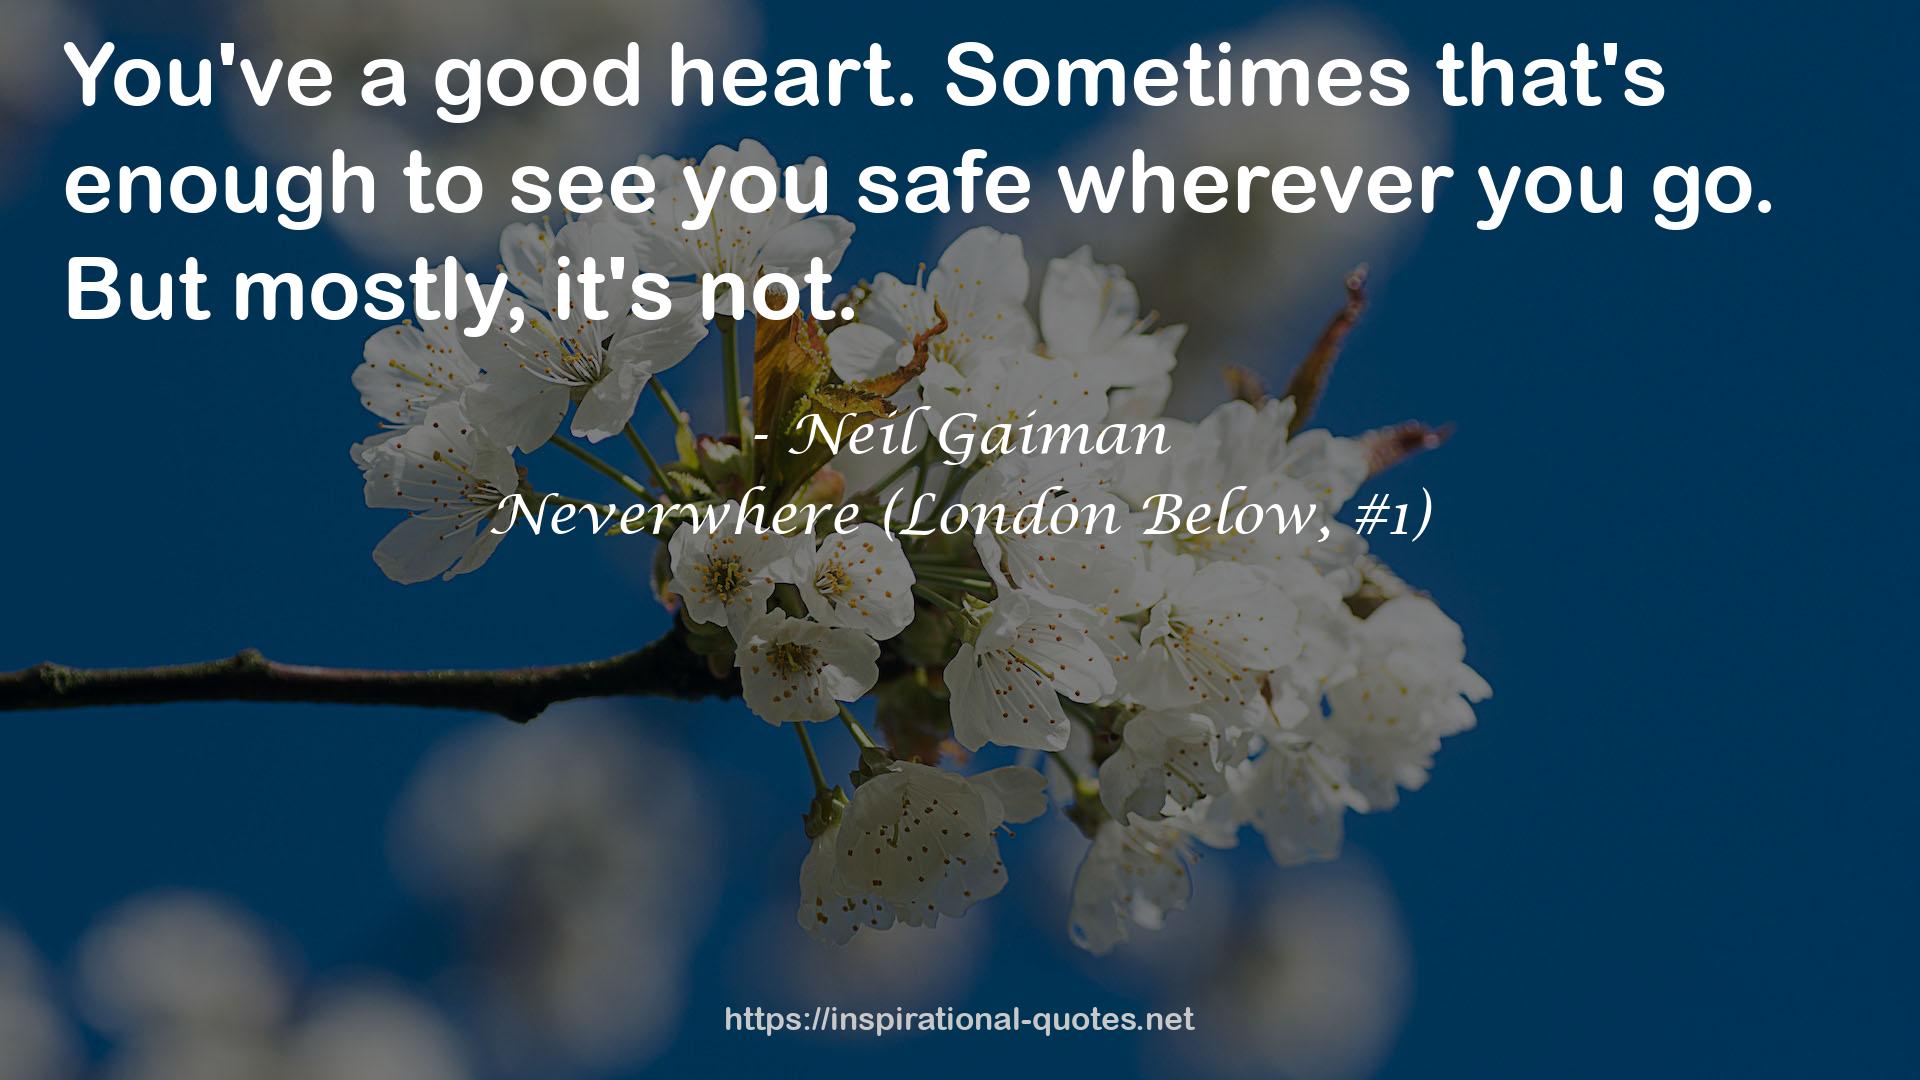 Neverwhere (London Below, #1) QUOTES